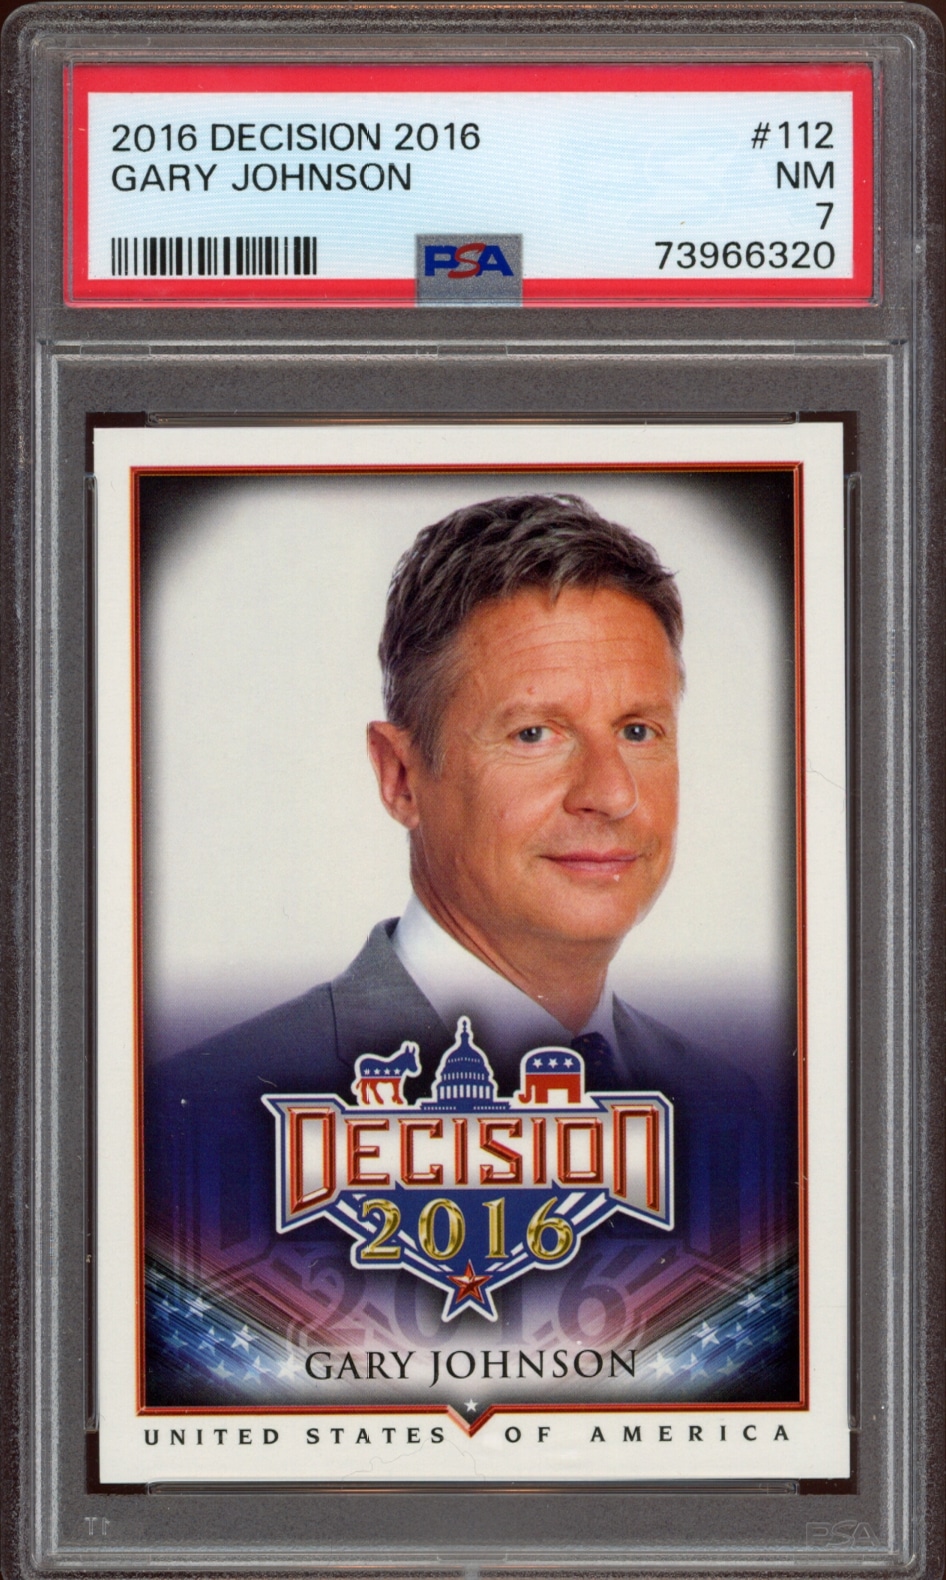 2016 Leaf Decision collectible card featuring political figure Gary Johnson in mint condition.